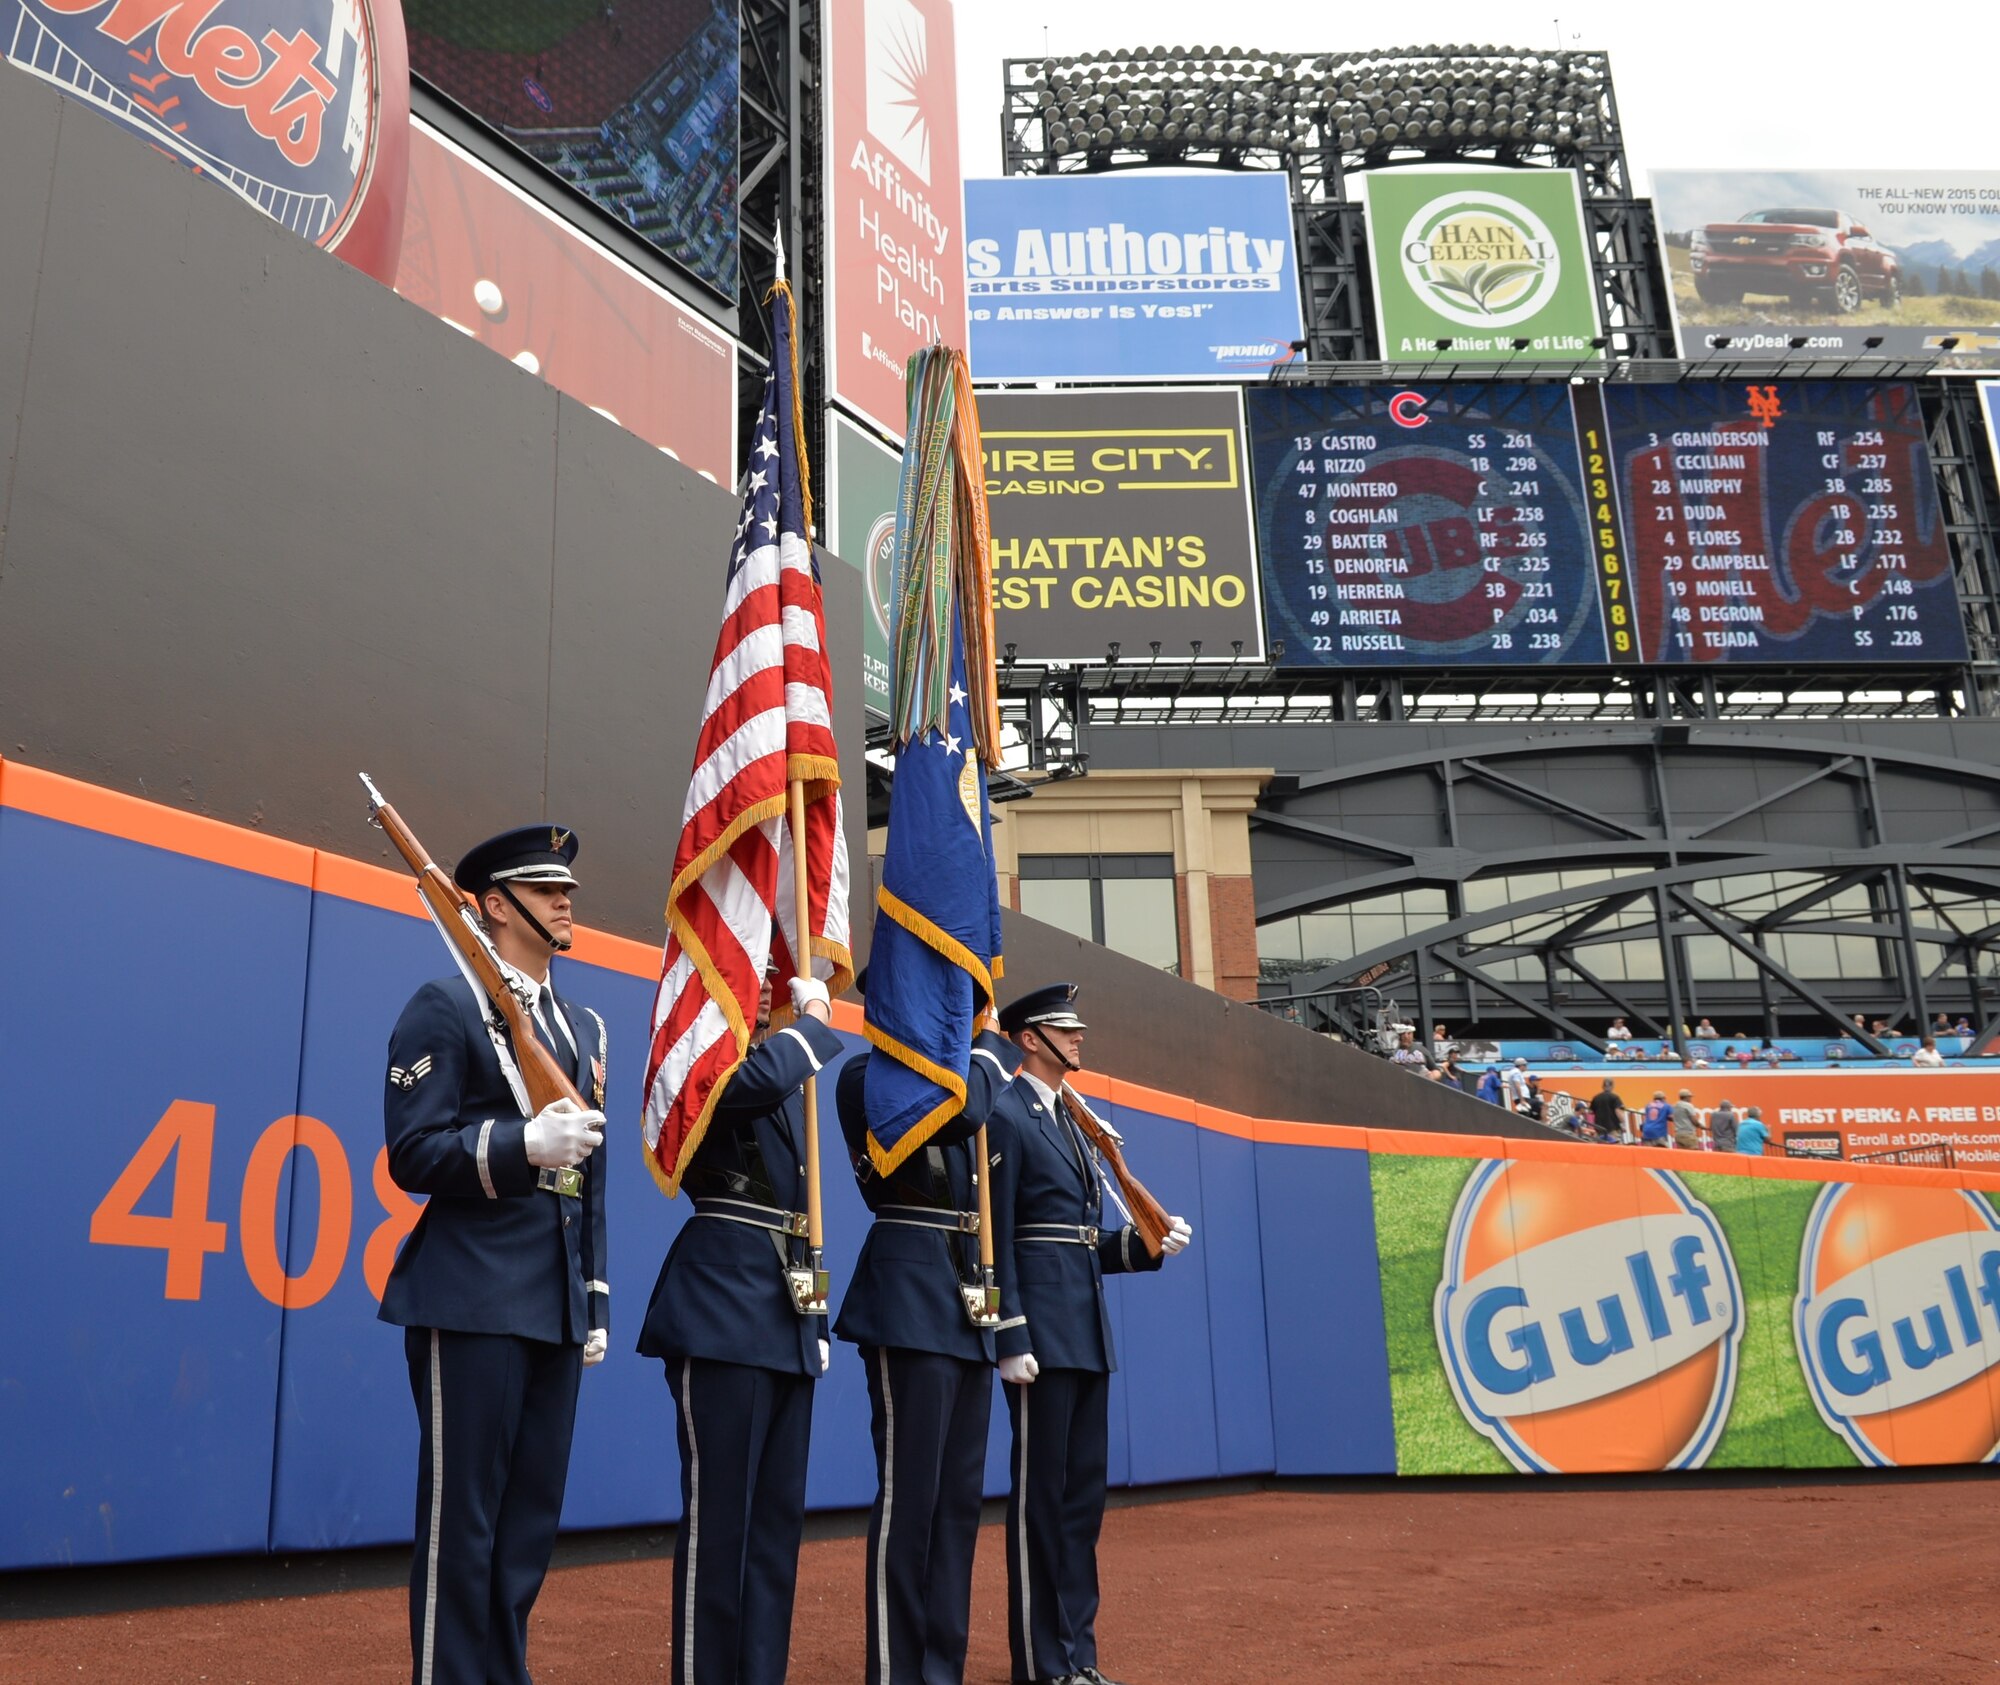 Members of the U.S. Honor Guard present the nation's Colors at New York City's Citi Field on July 2, 2015 before the Mets’ game. This performance was part of a larger five-day tour in New York City to represent the Air Force on the nation's birthday (U.S. Air Force photo/1Lt. Esther Willett).